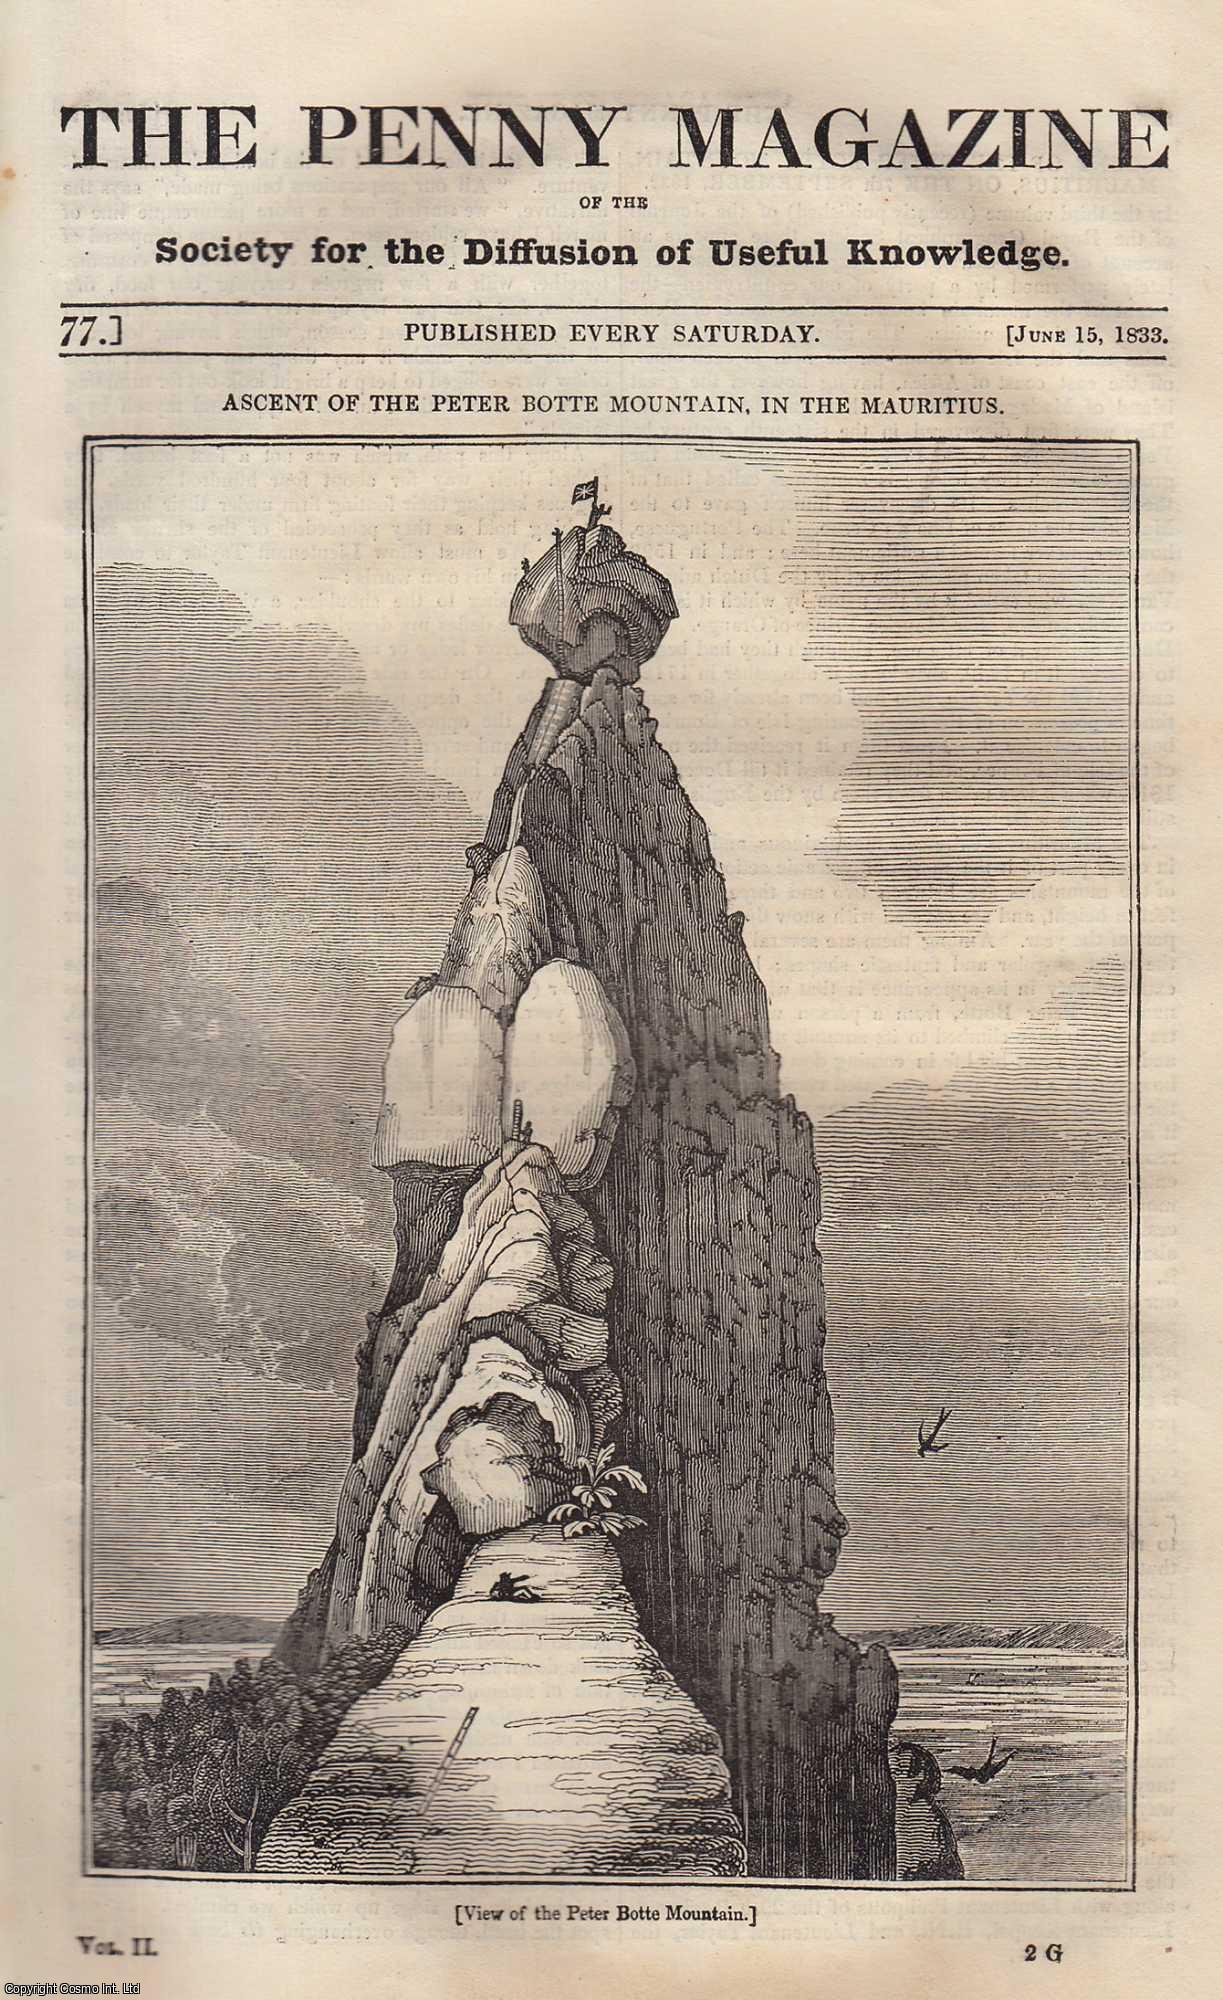 Penny Magazine - 1833. Ascent of The Peter Botte Mountain, in The Mauritius, on The 7th September, 1832; Magna Charta Island, France; Blaise Pascal (French Mathematician), etc. Issue No. 77, June 15th, 1833. A complete original weekly issue of the Penny Magazine, 1833.